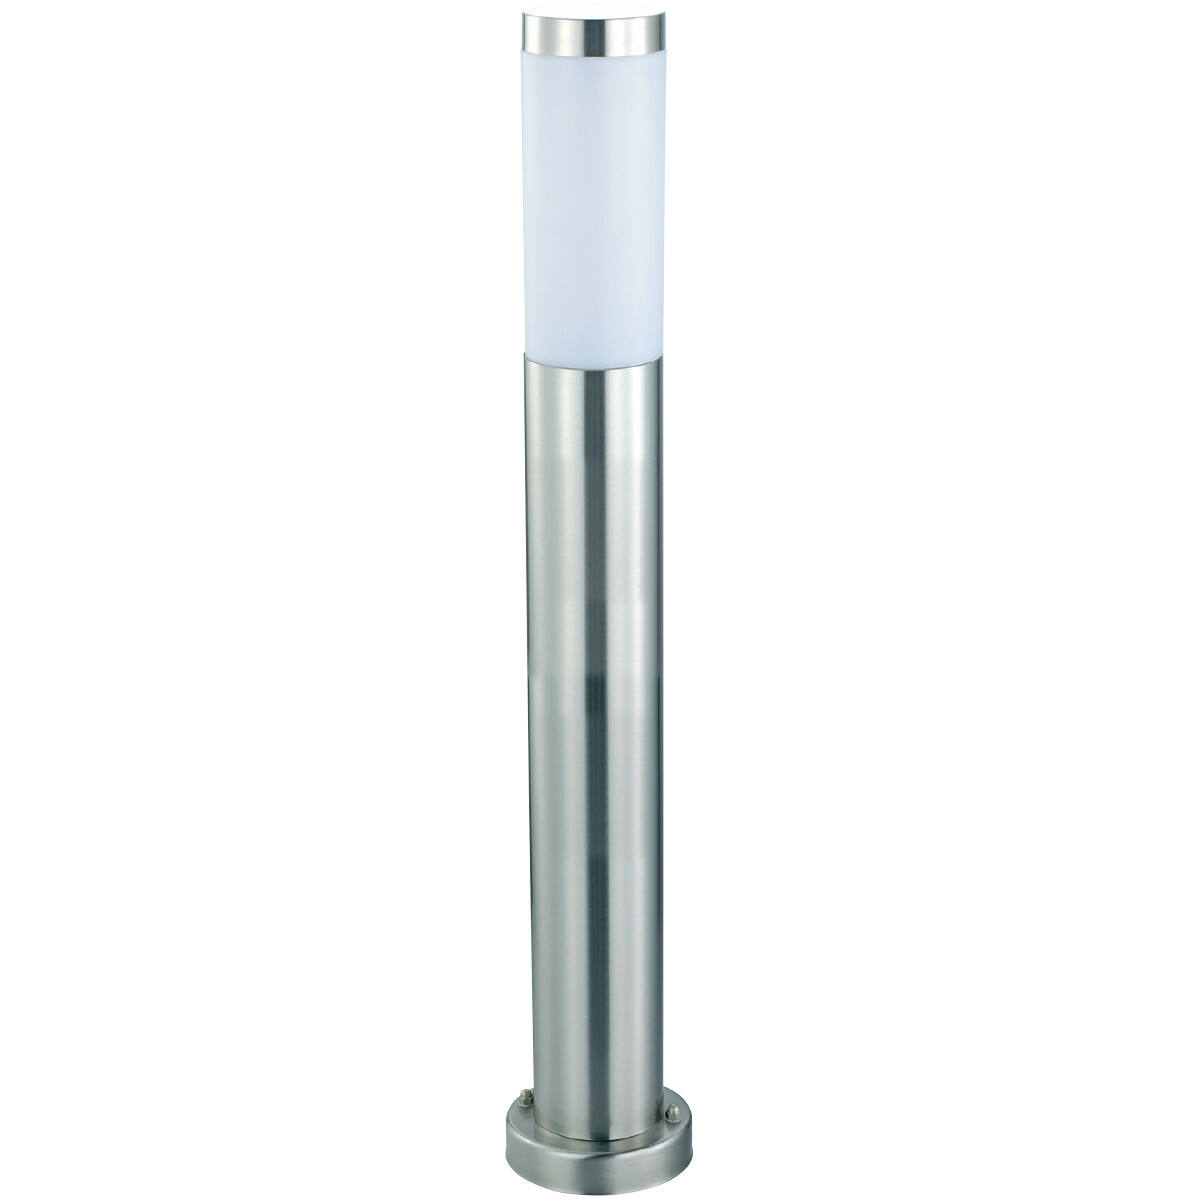 LED Tuinverlichting Buitenlamp Laurea 5 - Staand - - E27 - Rond | BES LED